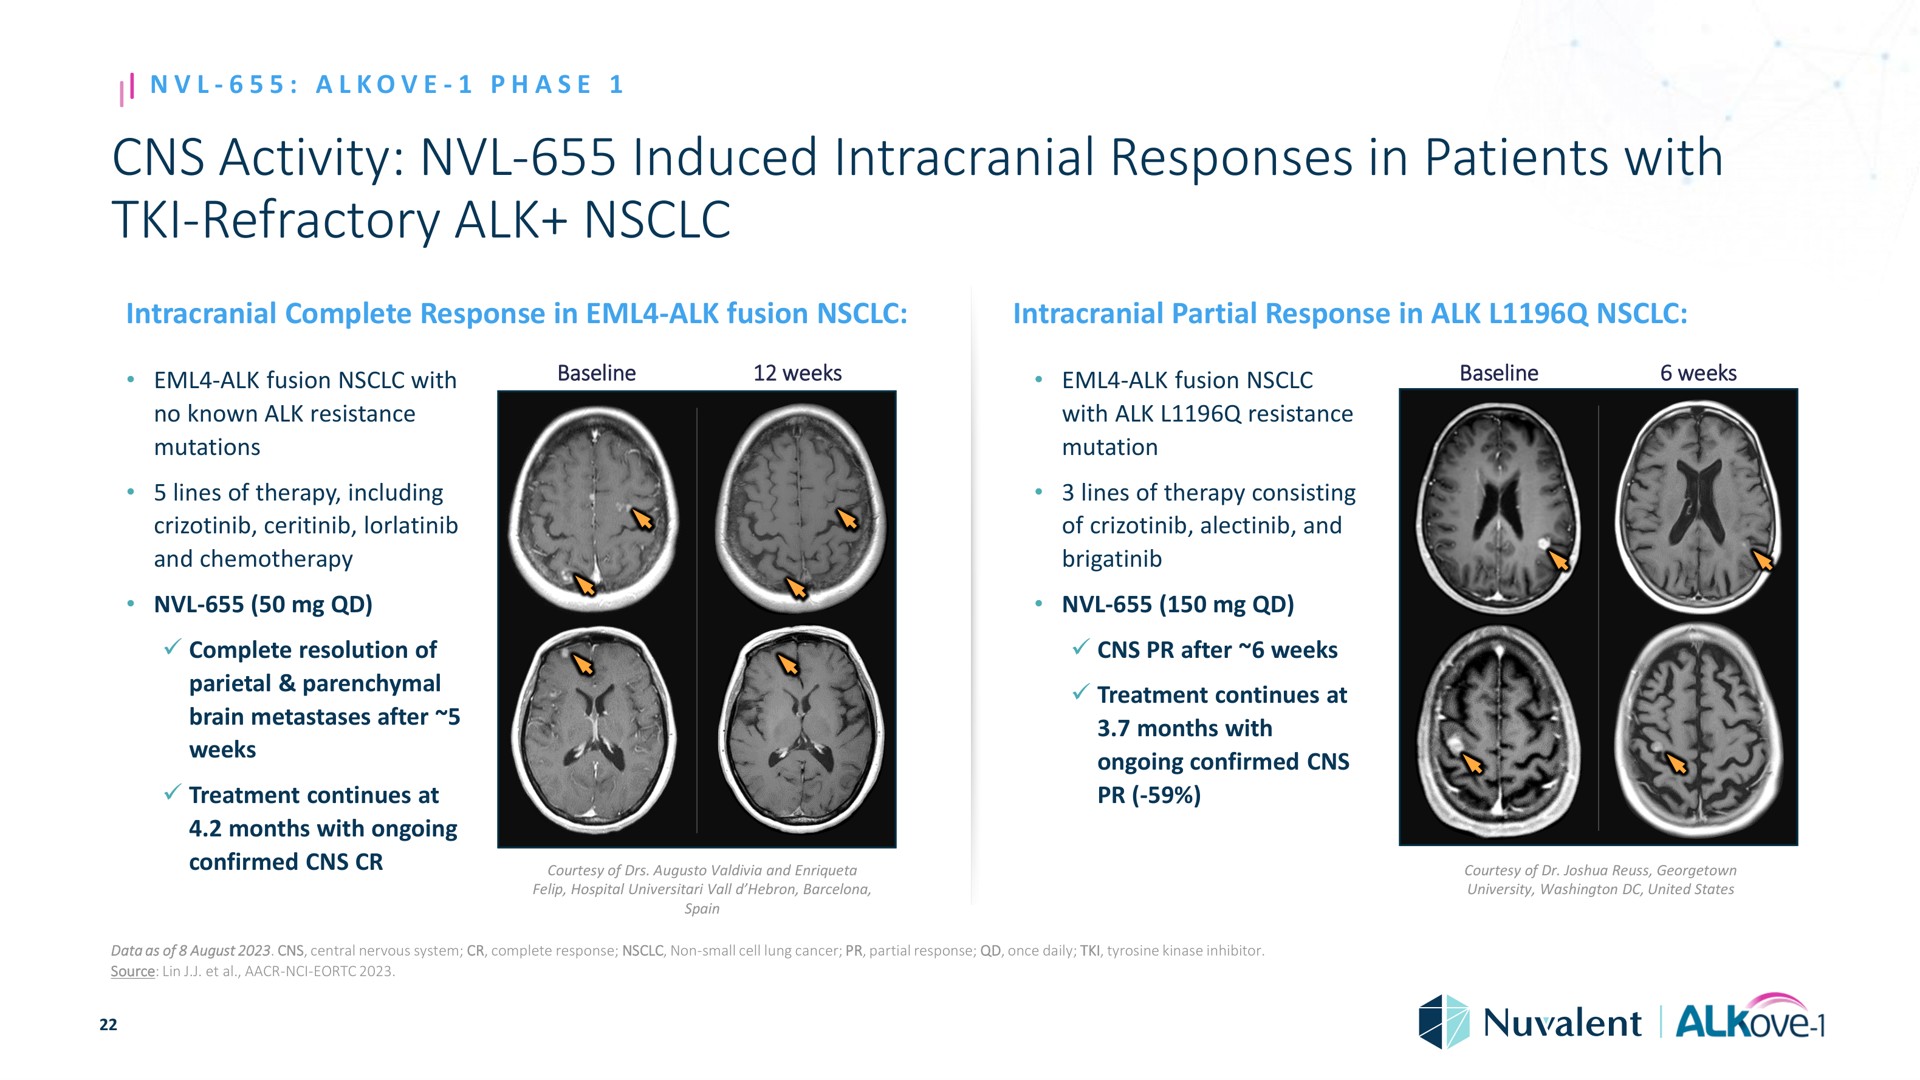 activity induced intracranial responses in patients with refractory alk phase refractory complete response alk fusion partial response alk fusion no known resistance mutations lines of therapy including and chemotherapy complete resolution of parietal parenchymal brain metastases after weeks treatment continues at months ongoing confirmed weeks weeks alk fusion resistance mutation lines of therapy consisting of and after weeks treatment continues at months ongoing confirmed courtesy of and hospital vall barcelona courtesy of university united states data as of august central nervous system complete response non small source lin cell lung cancer partial resp once daily tyrosine kinase inhibitor | Nuvalent